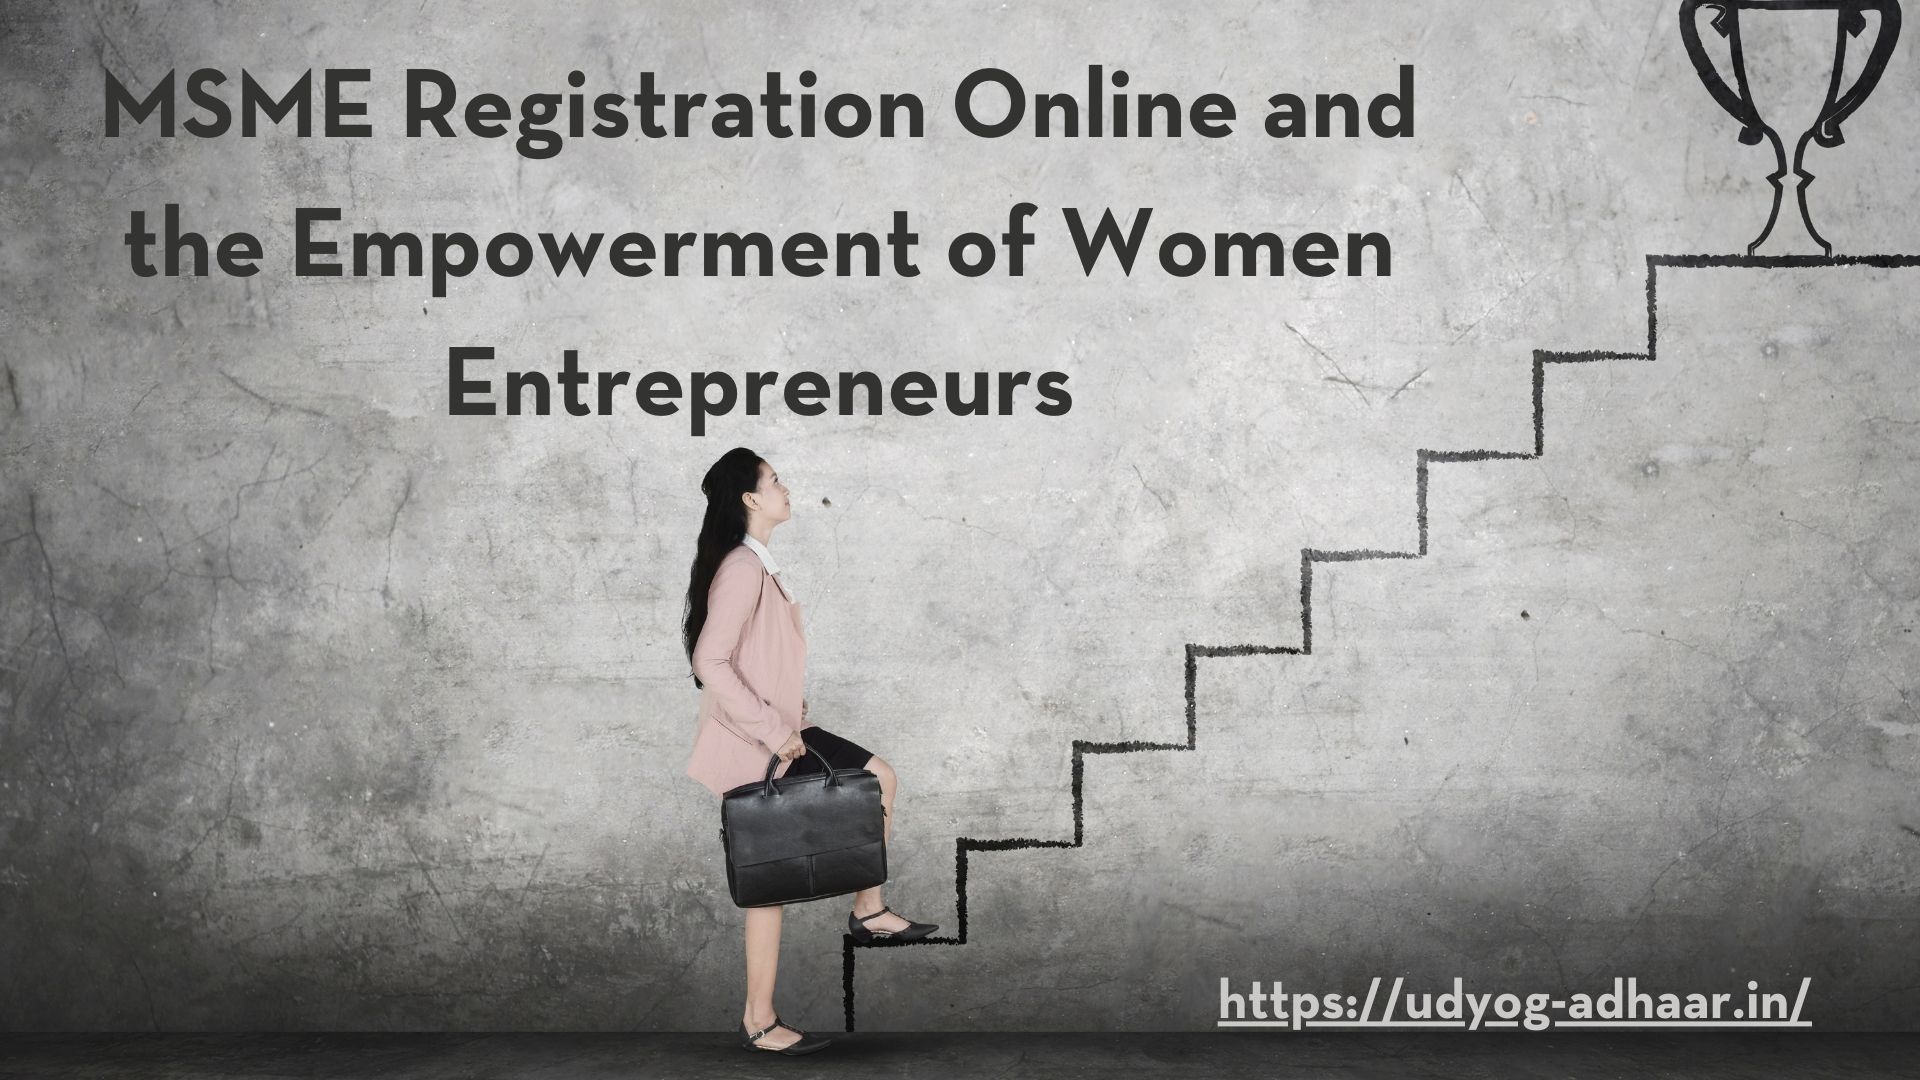 MSME Registration Online and the Empowerment of Women Entrepreneurs